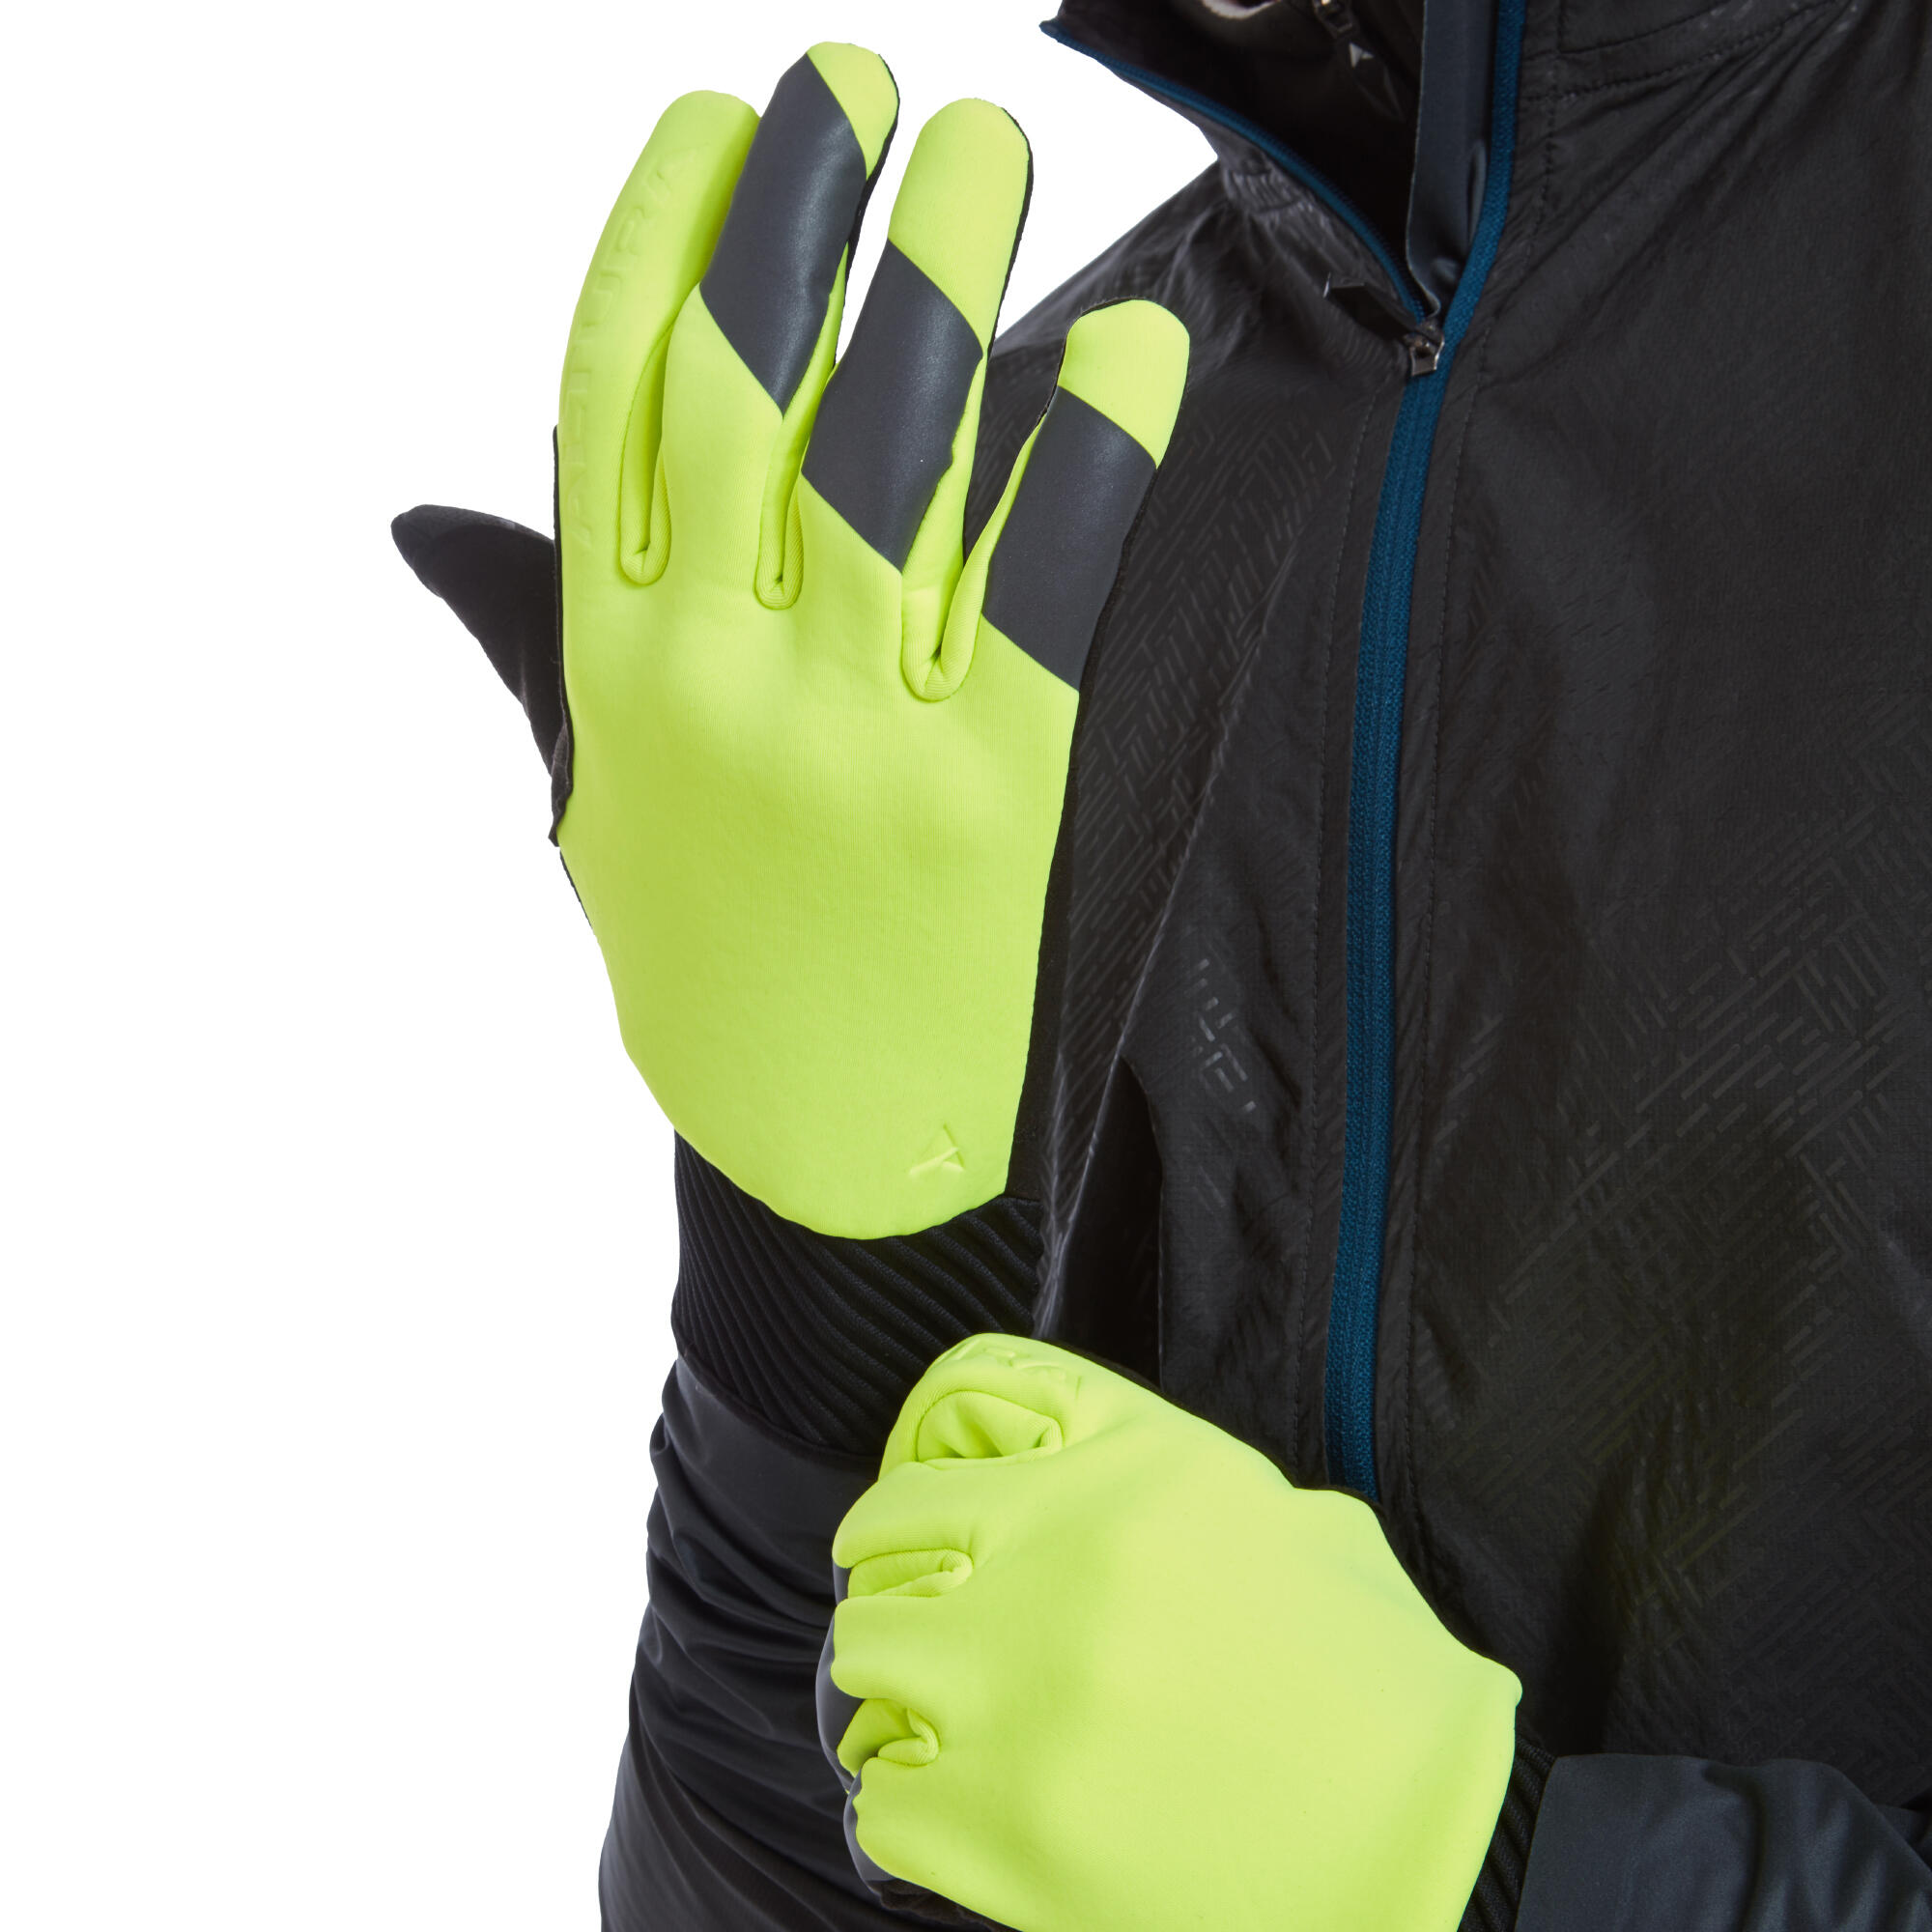 Nightvision Unisex Windproof Cycling Gloves 3/4